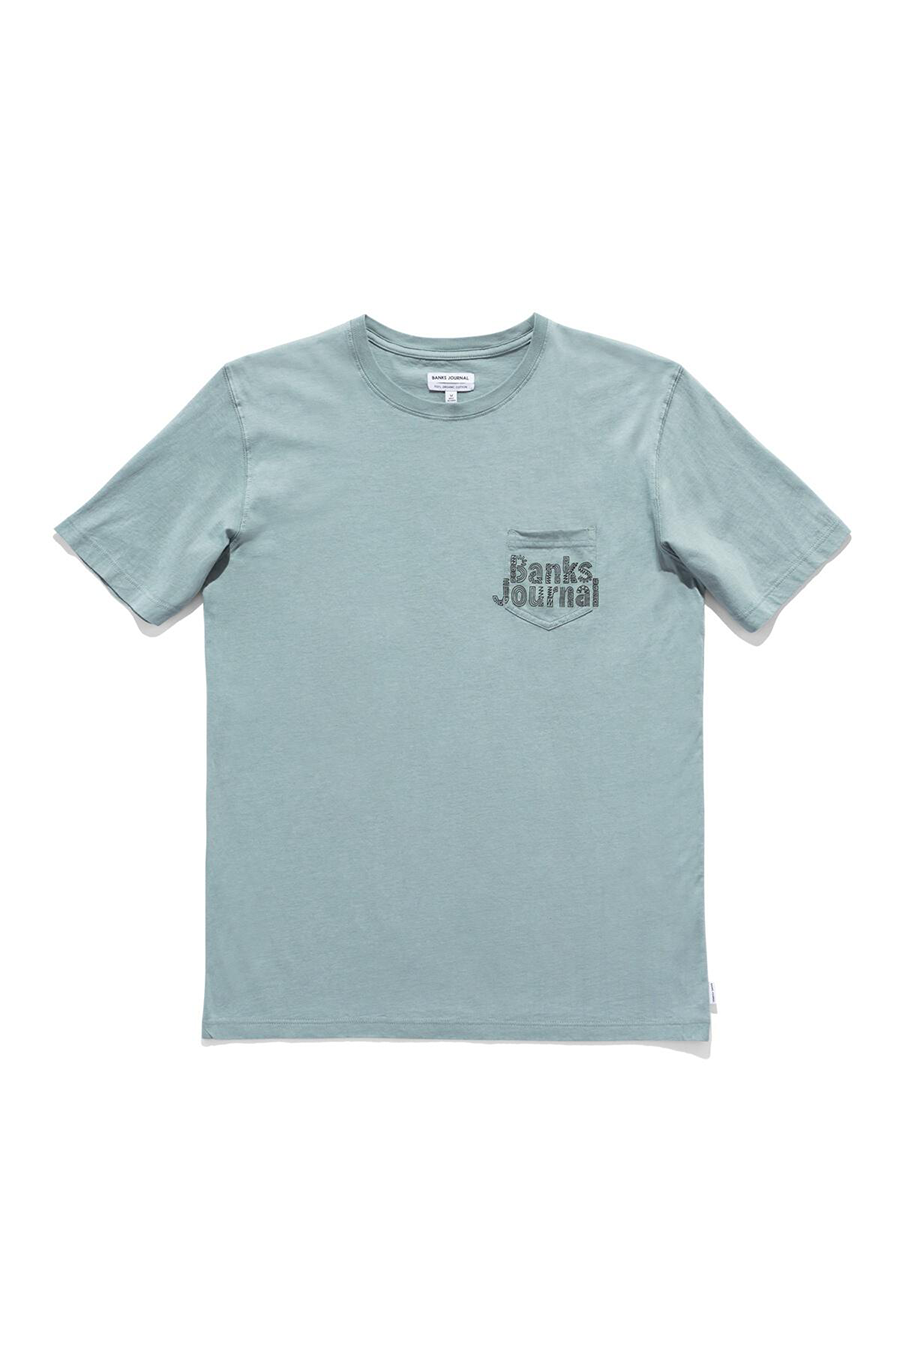 Bunker Faded Tee | Dust Blue - Main Image Number 1 of 1